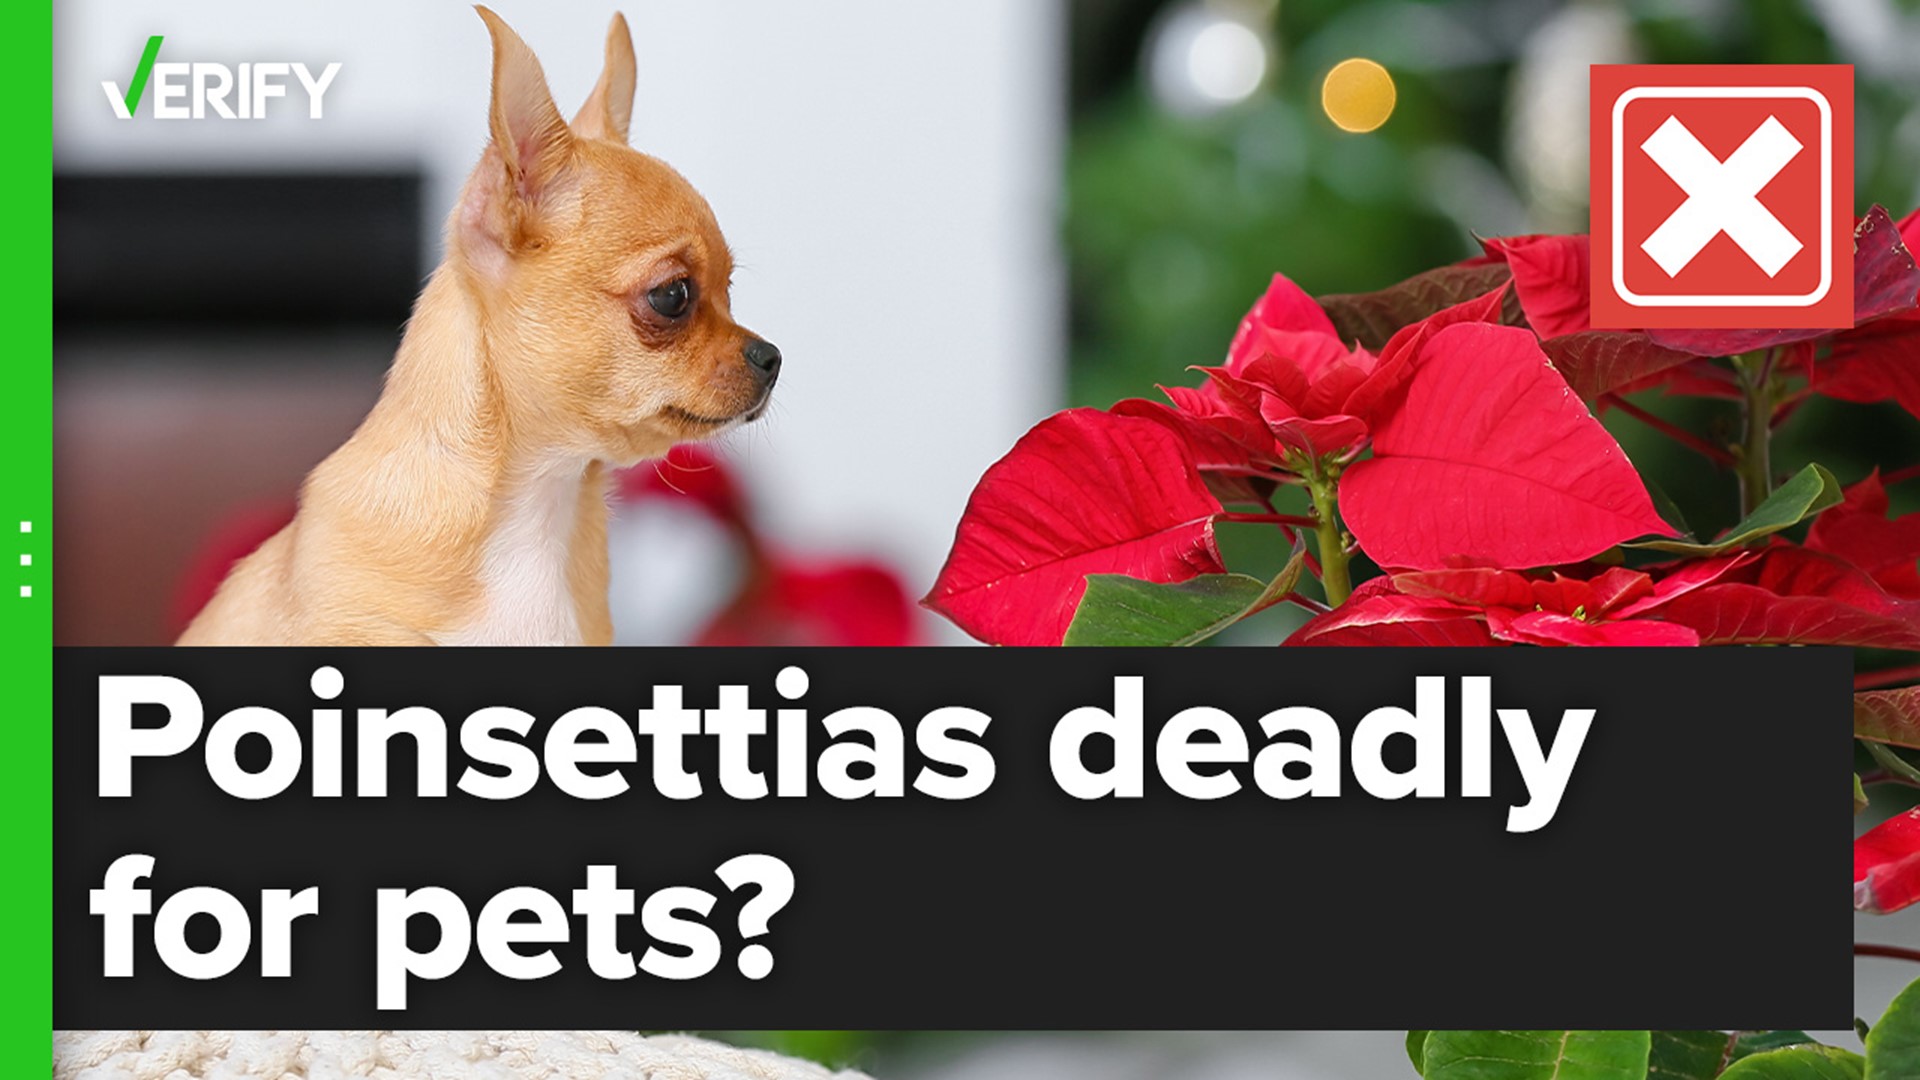 Contrary to popular belief, poinsettias are not deadly to cats and dogs. But they still might get sick if they eat the plant.